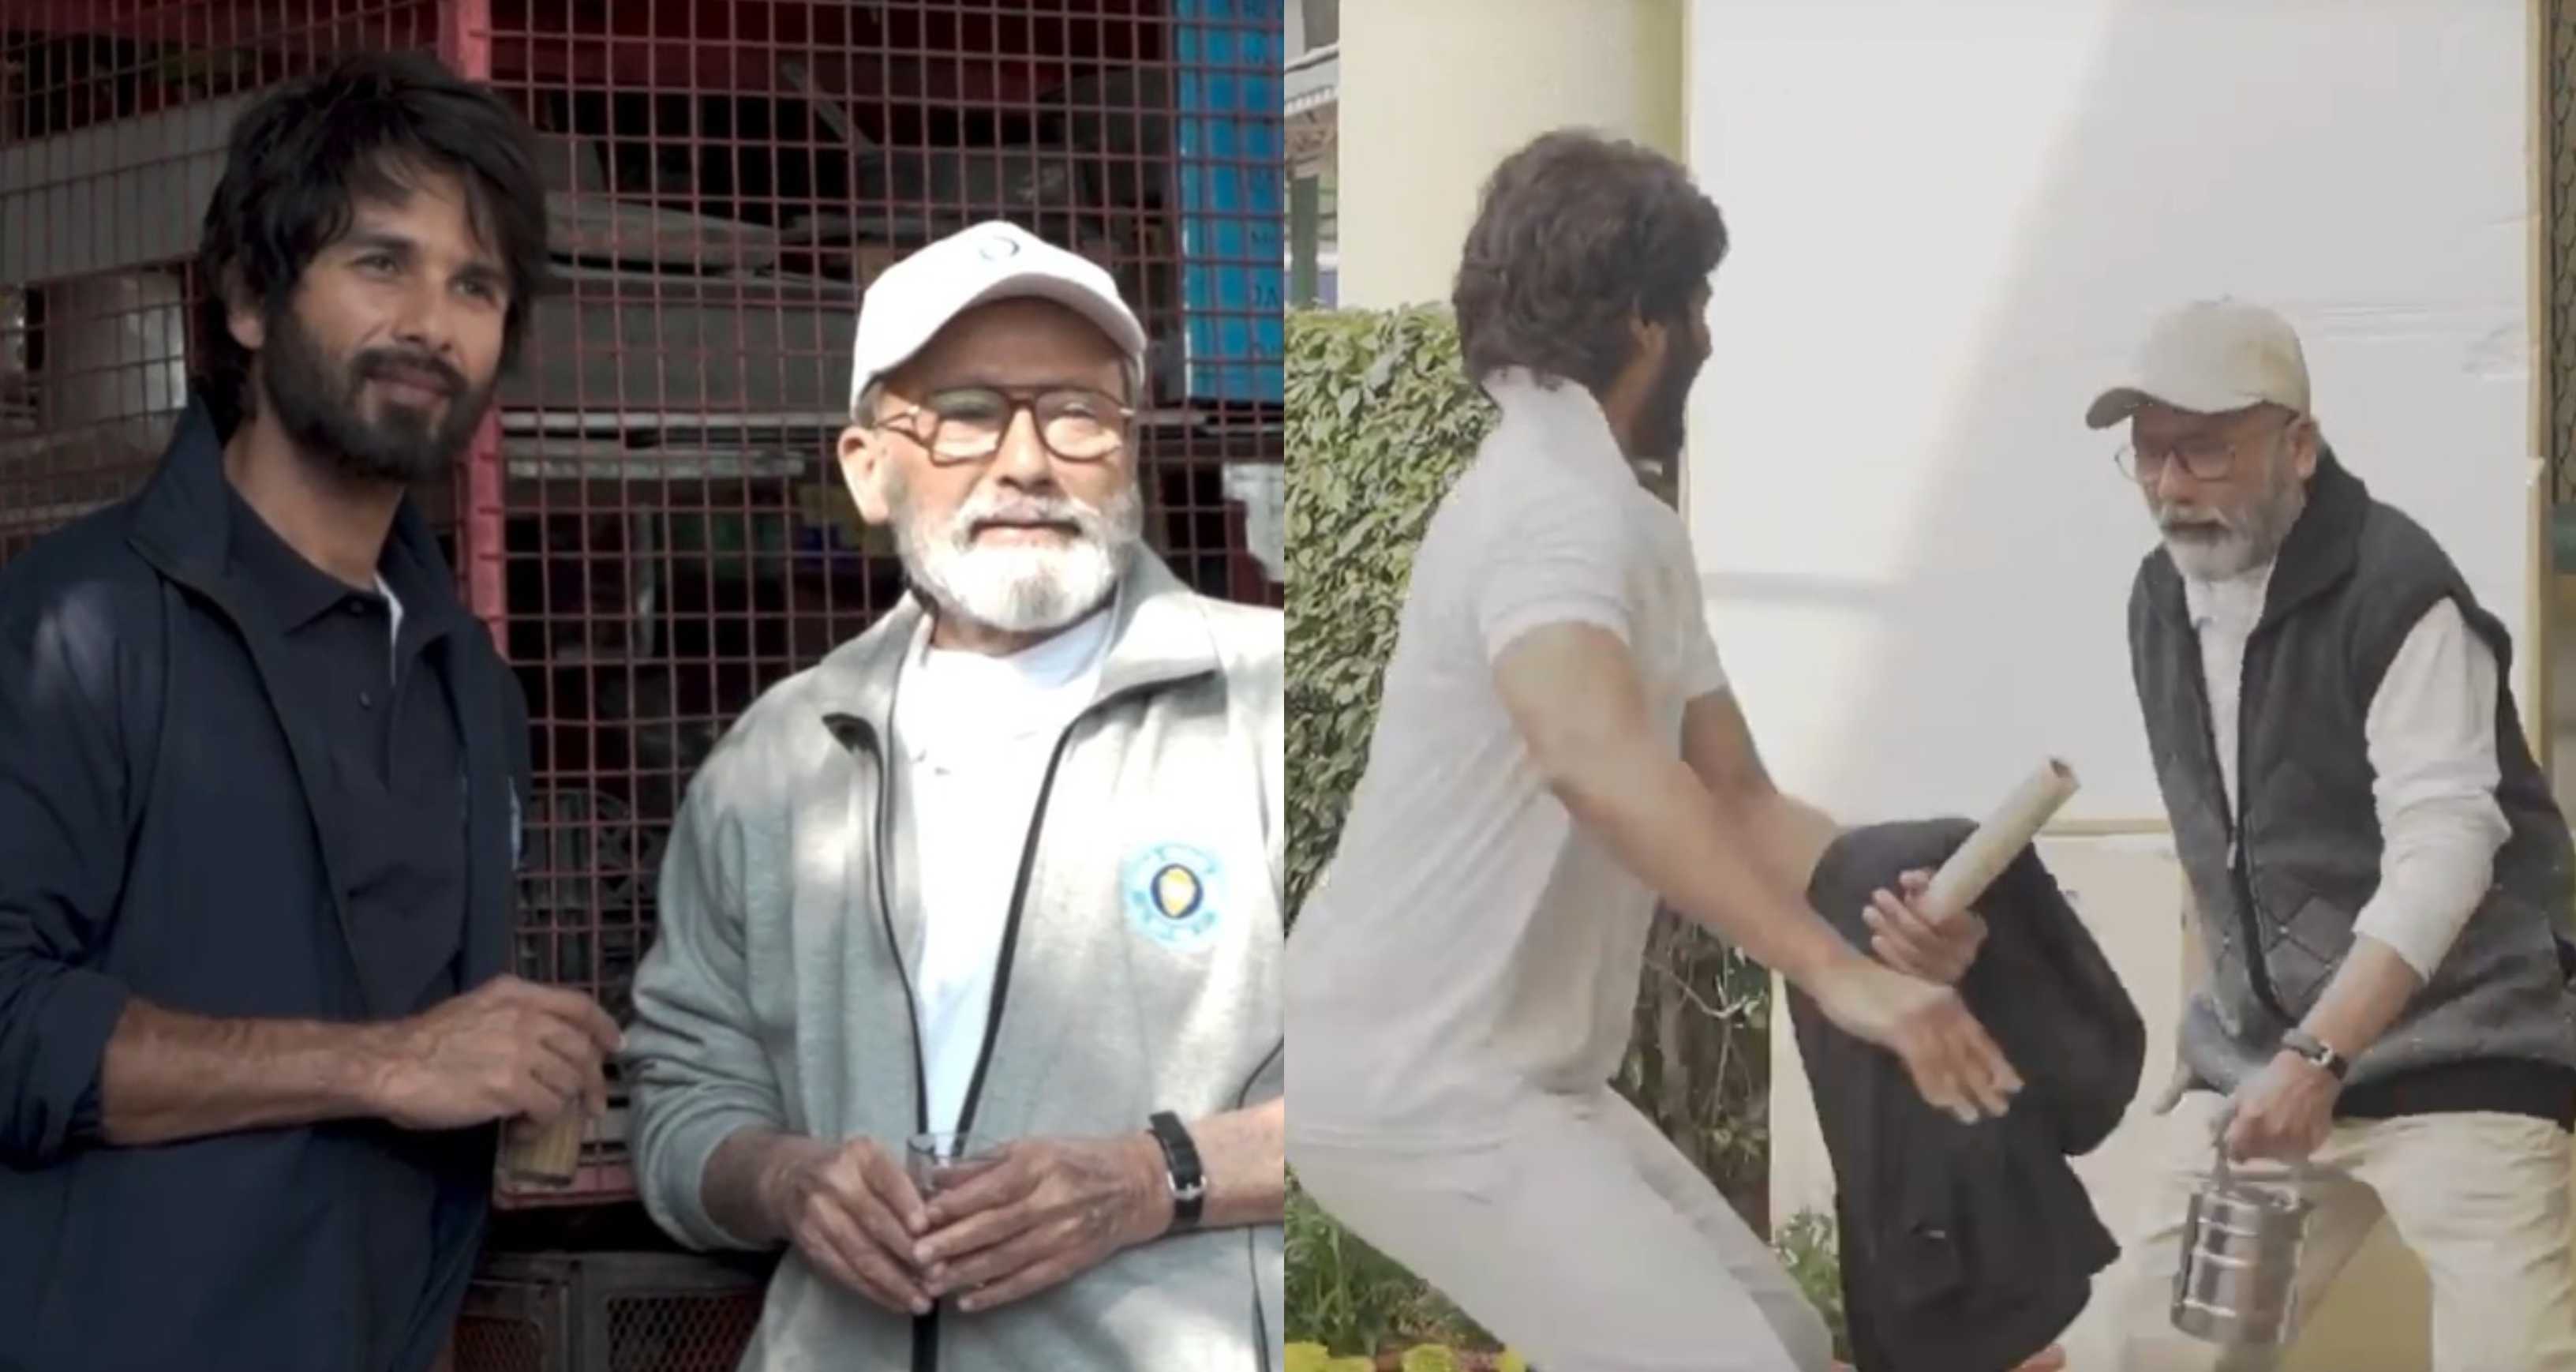 Jersey: Shahid Kapoor shares glimpse of his bond with father Pankaj Kapur in this heartwarming BTS video